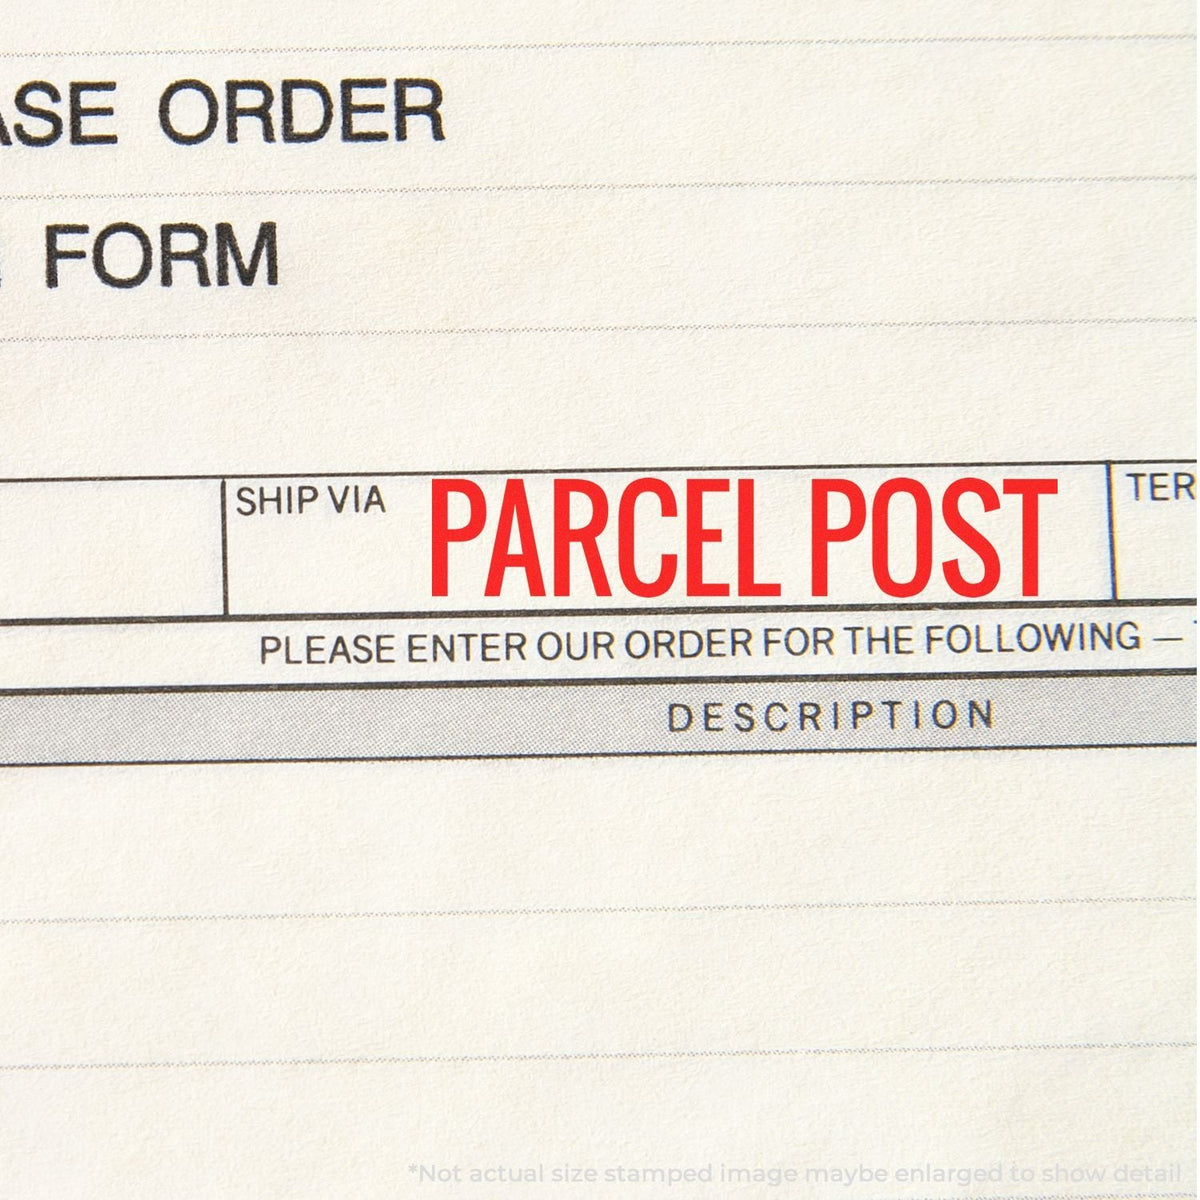 In Use Self-Inking Parcel Post Stamp Image